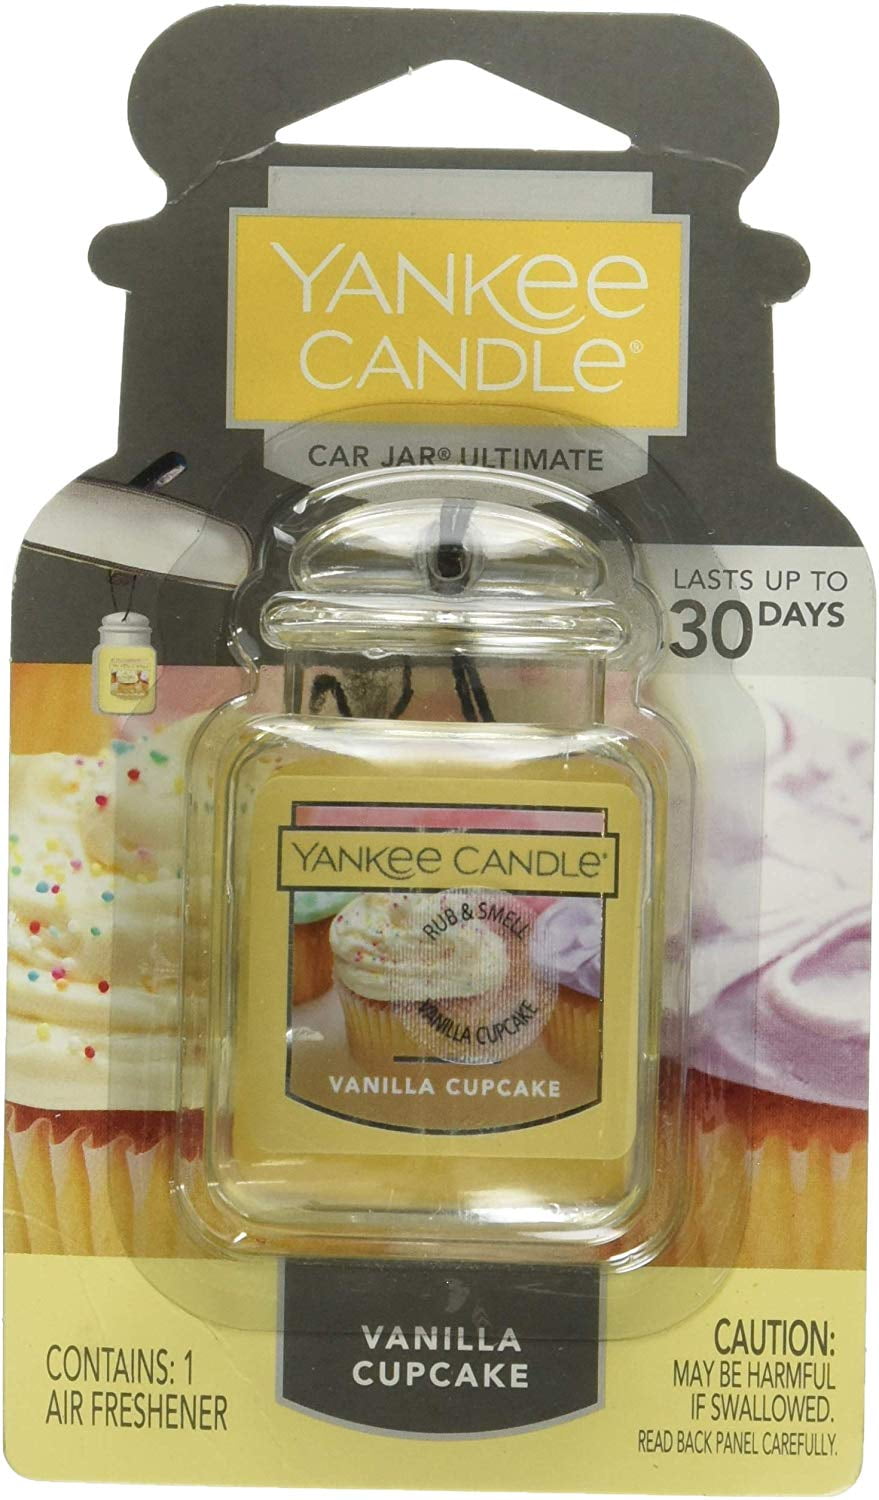 Yankee Candle Car Air Fresheners, Hanging Car Jar® Ultimate 3-Pack,  Neutralizes Odors Up To 30 Days, Includes: 1 Vanilla Cupcake, Black Cherry,  and 1